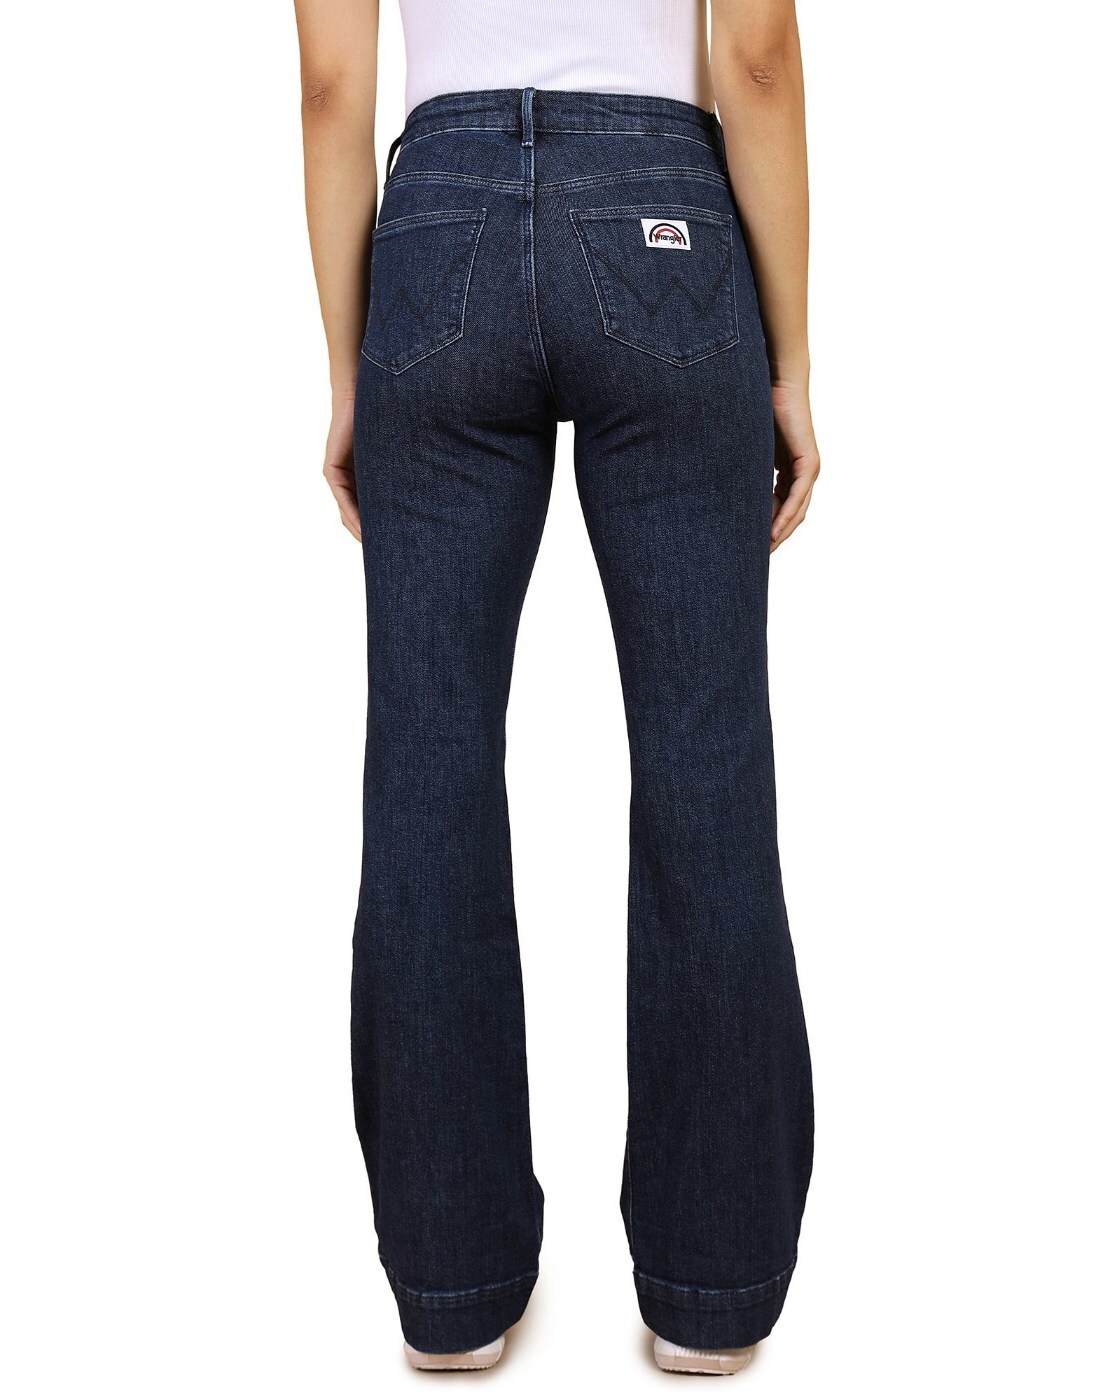 Shop for Latest Flare Jeans for Women Online Starting @ ₹999